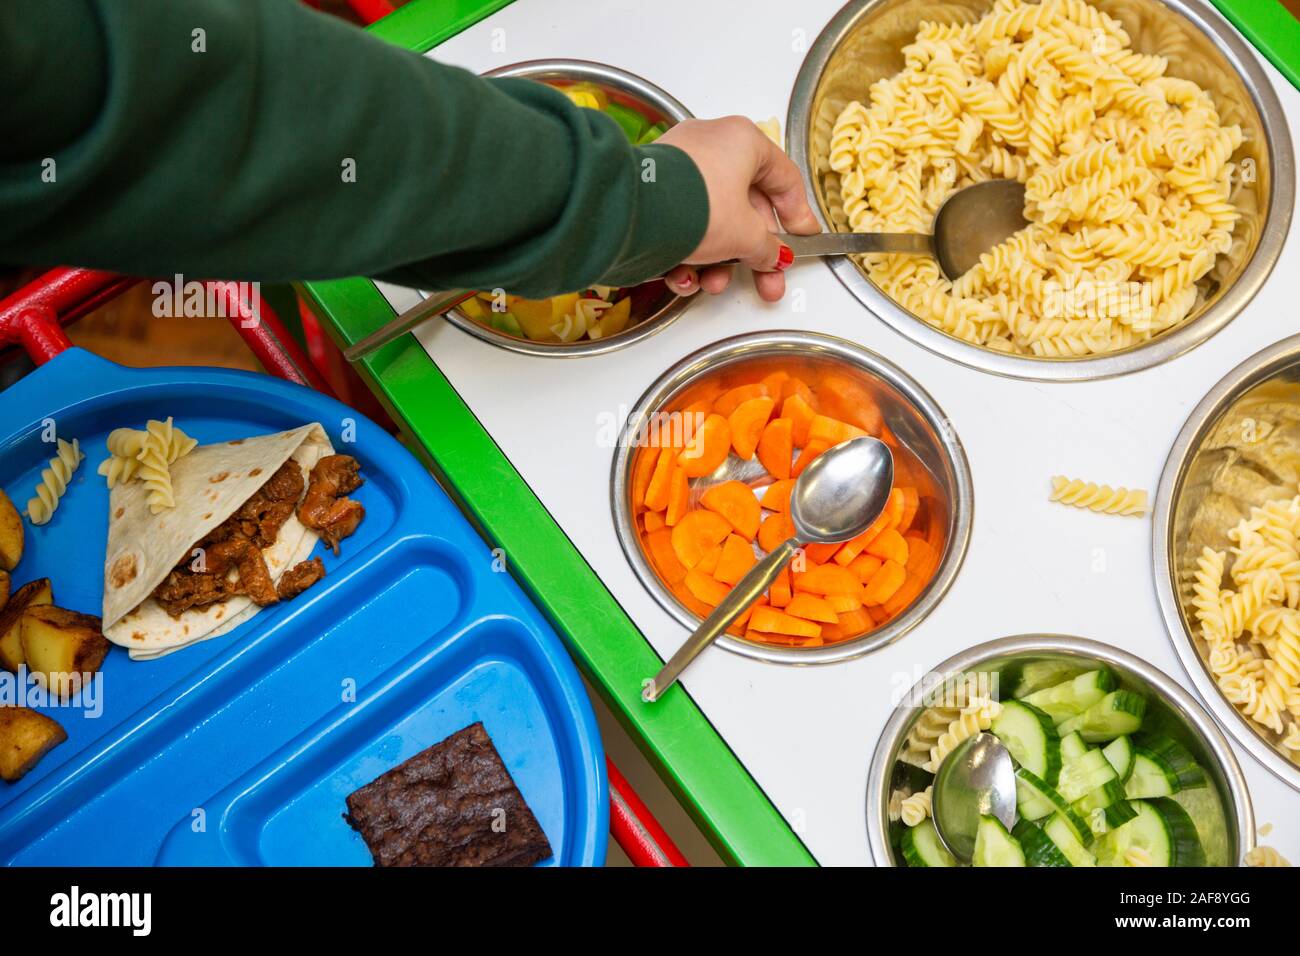 Tray of school lunch or dinner in a UK primary school Stock Photo